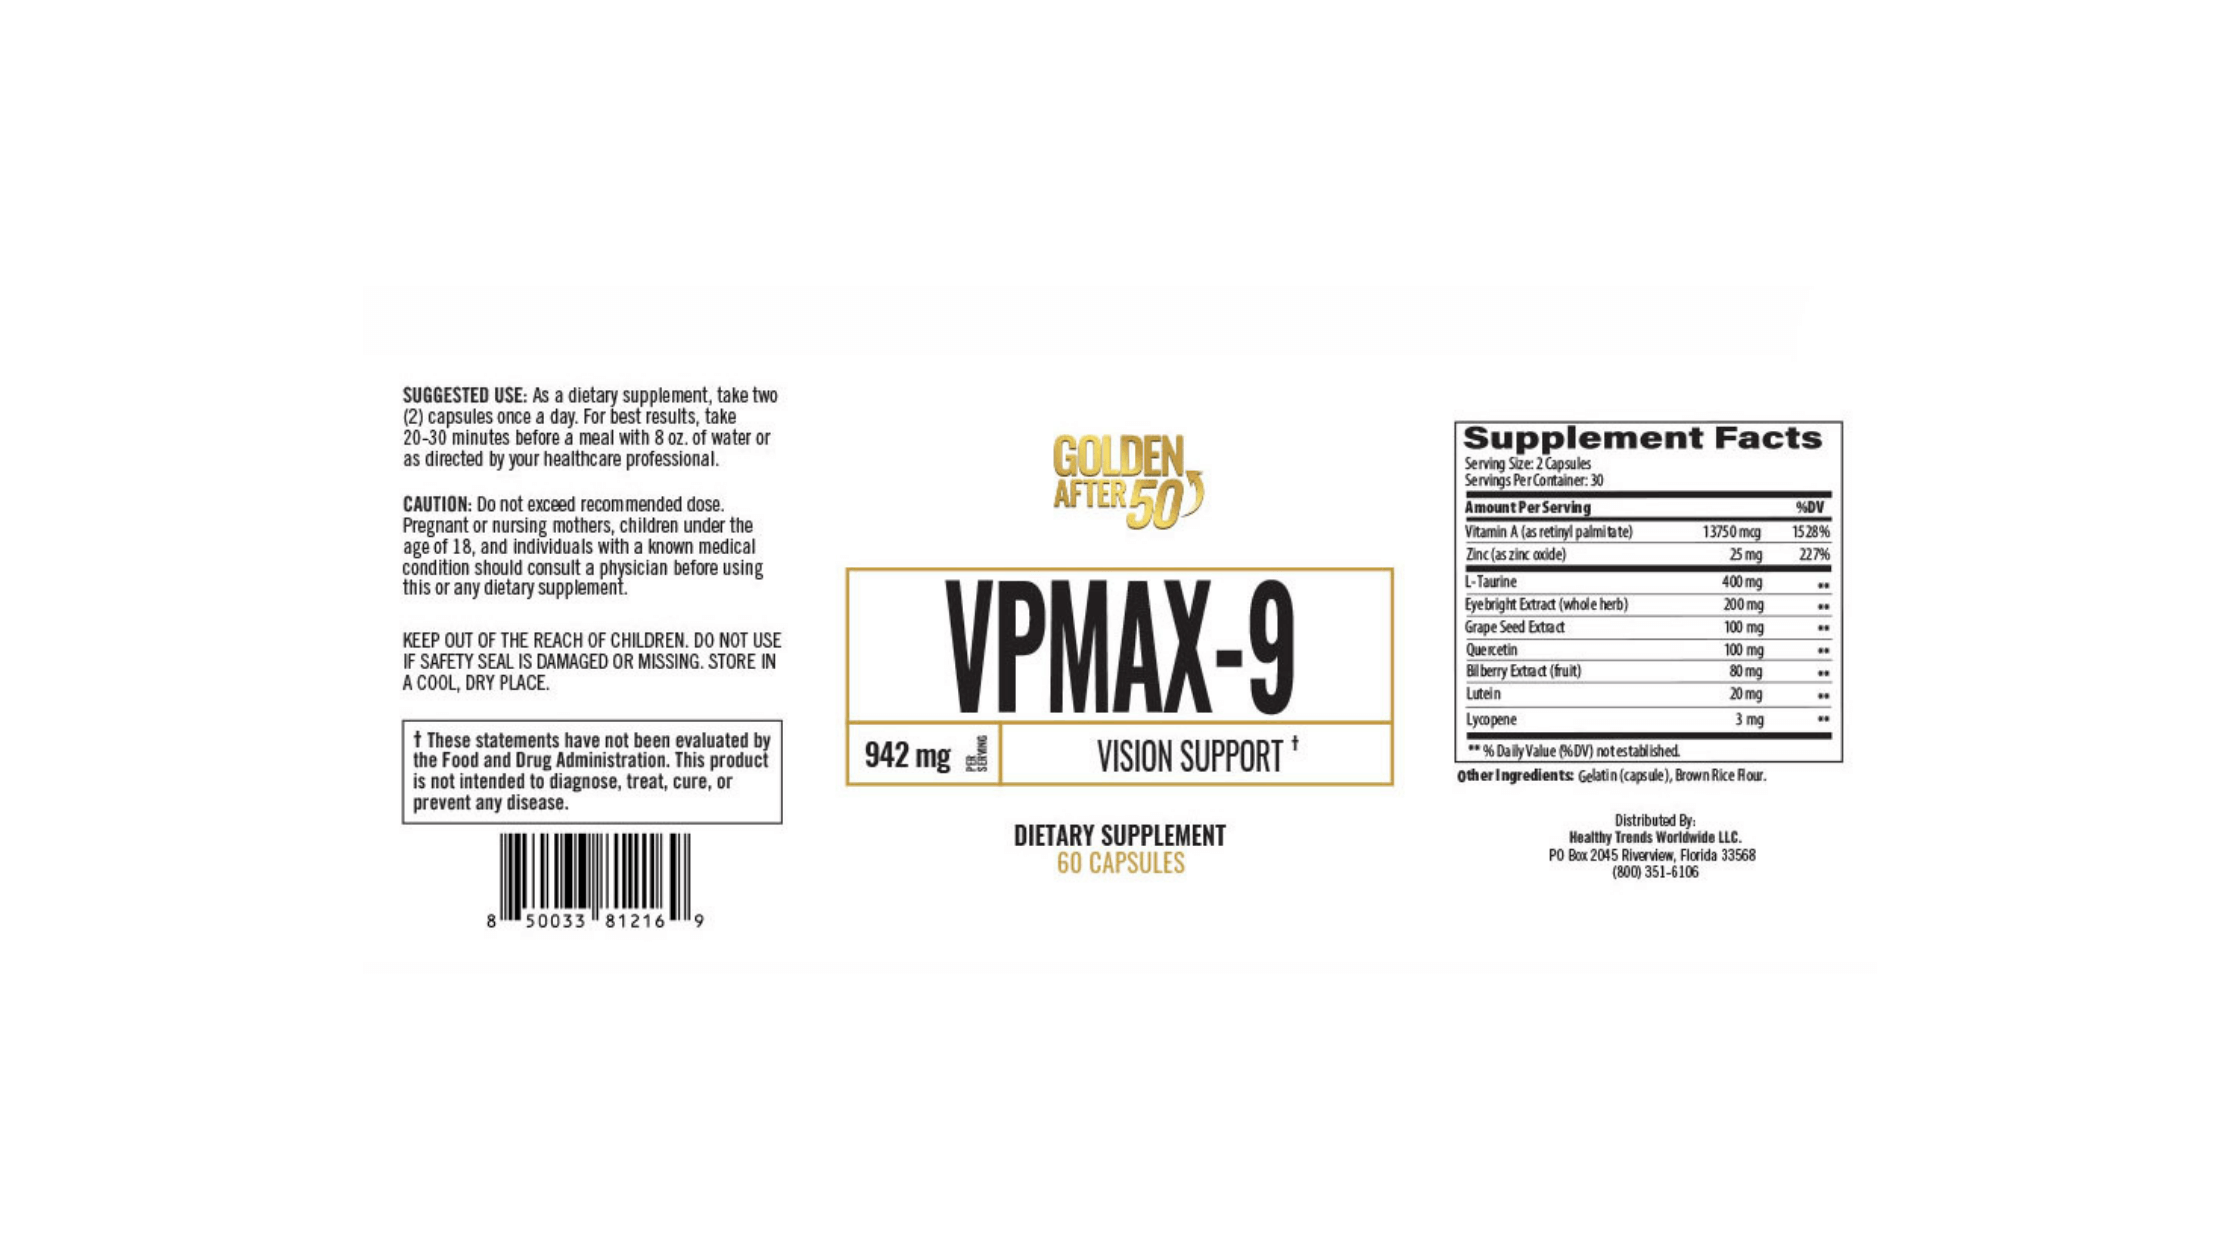 VpMax-9 supplement facts